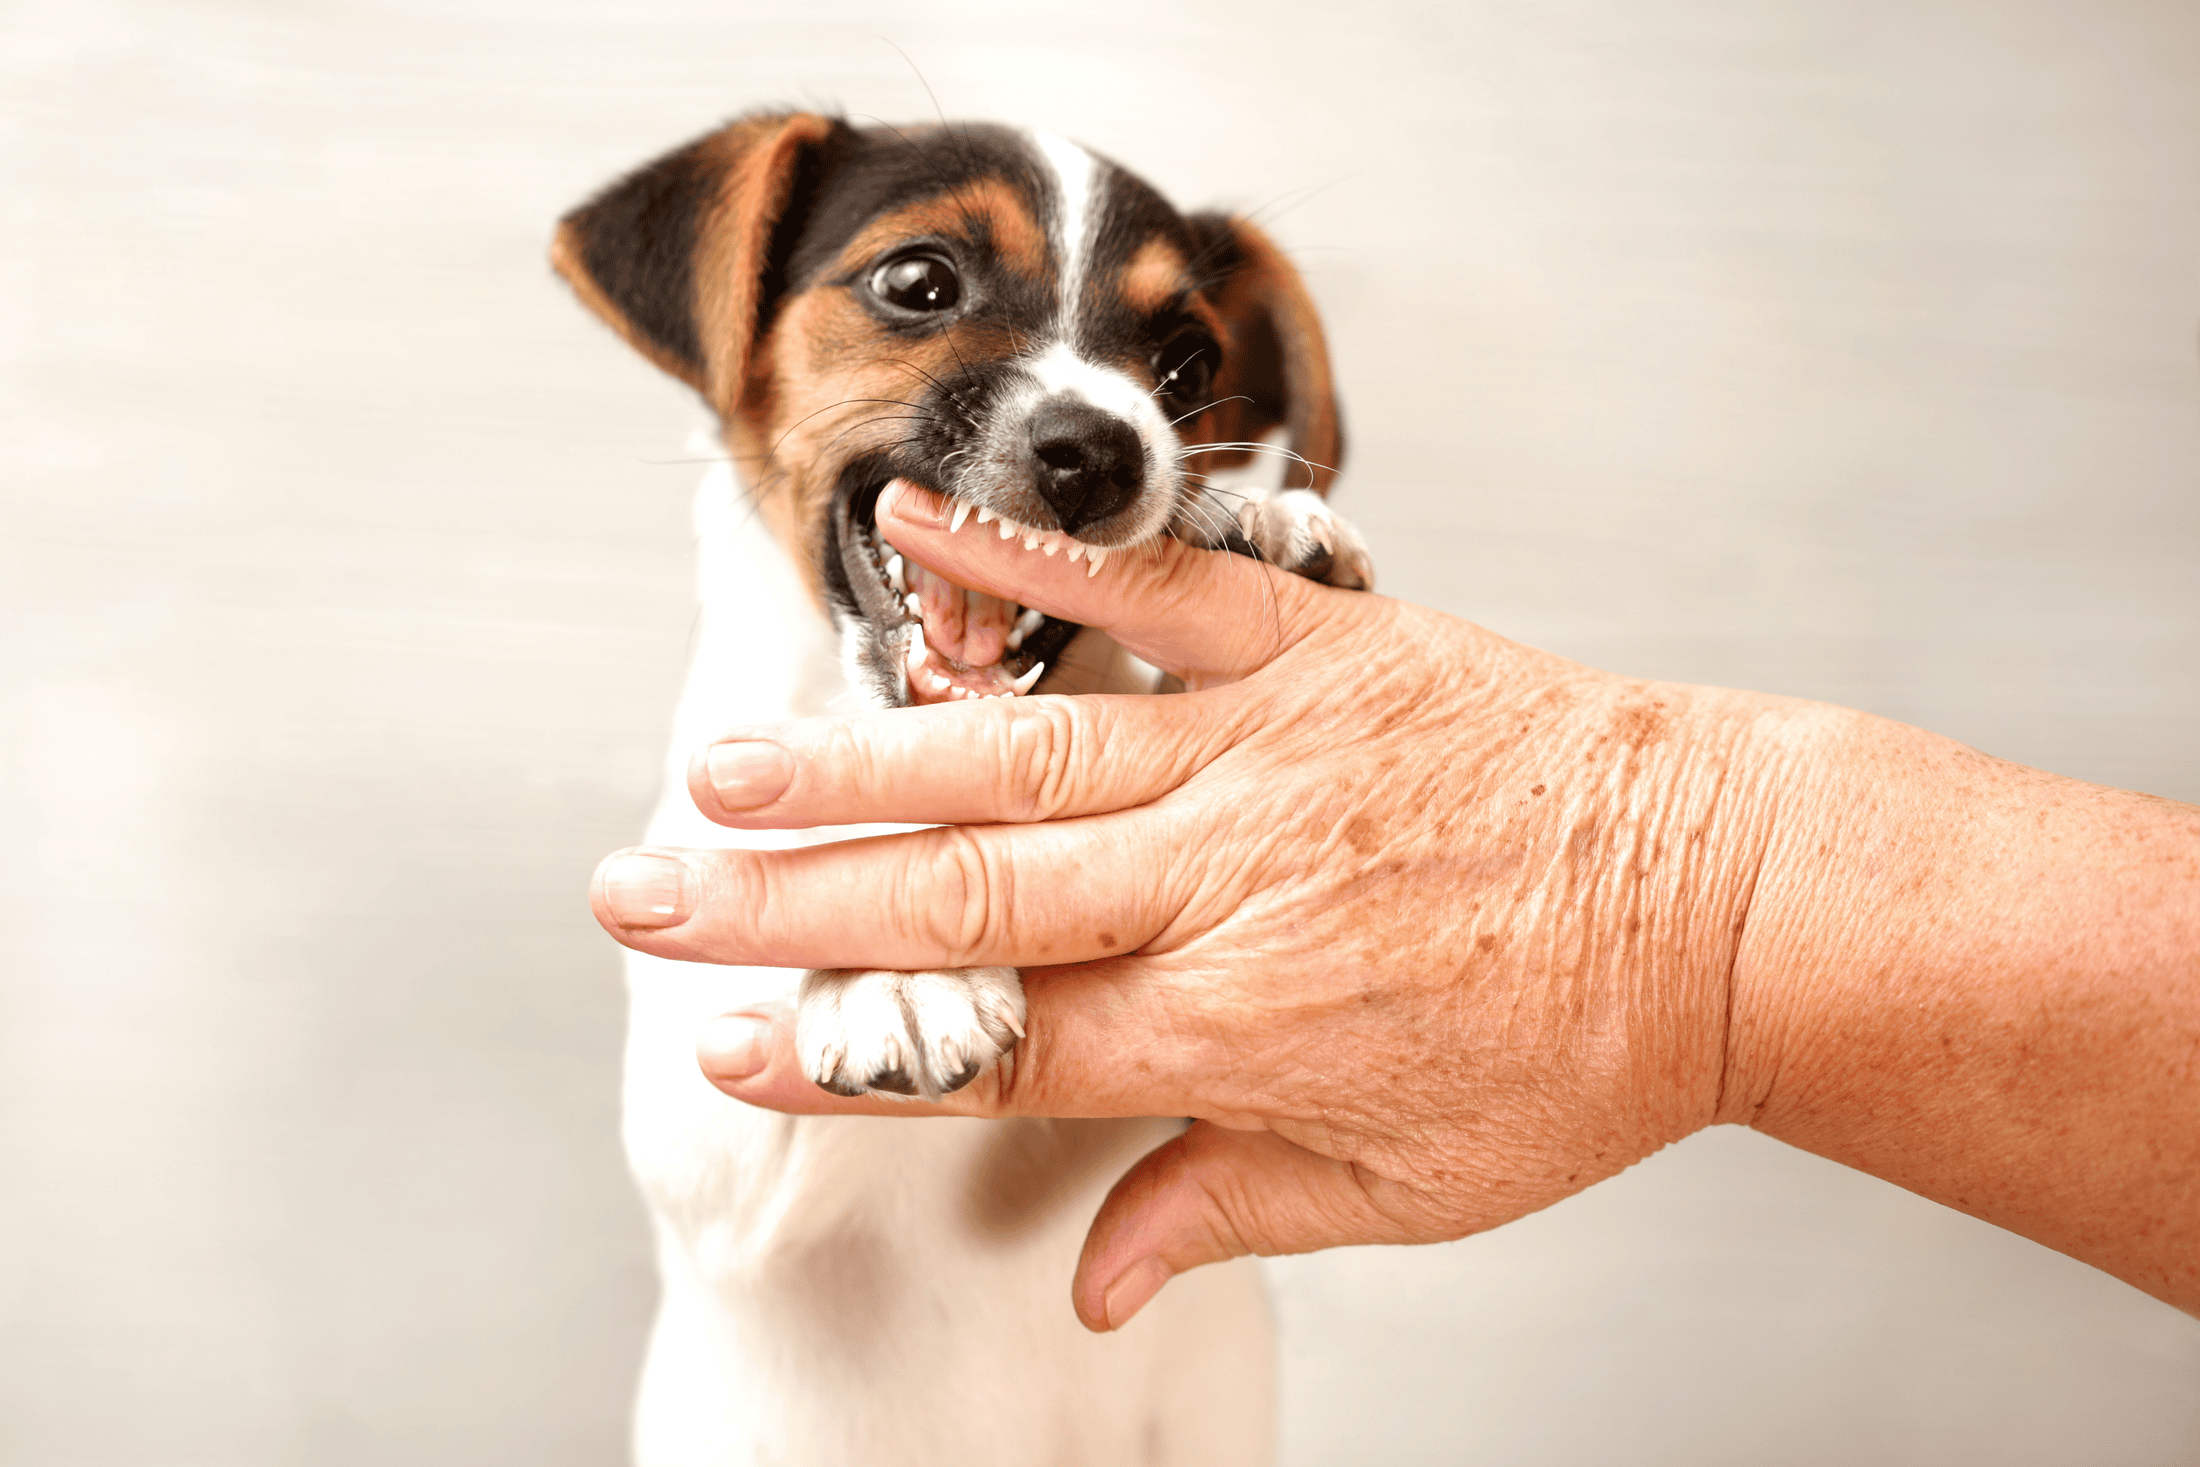 Puppies bite so it is important to teach bite inhibition. Adult teeth are much stronger than baby teeth. Puppies nip, so if your puppy starts biting, do not be alarmed. 